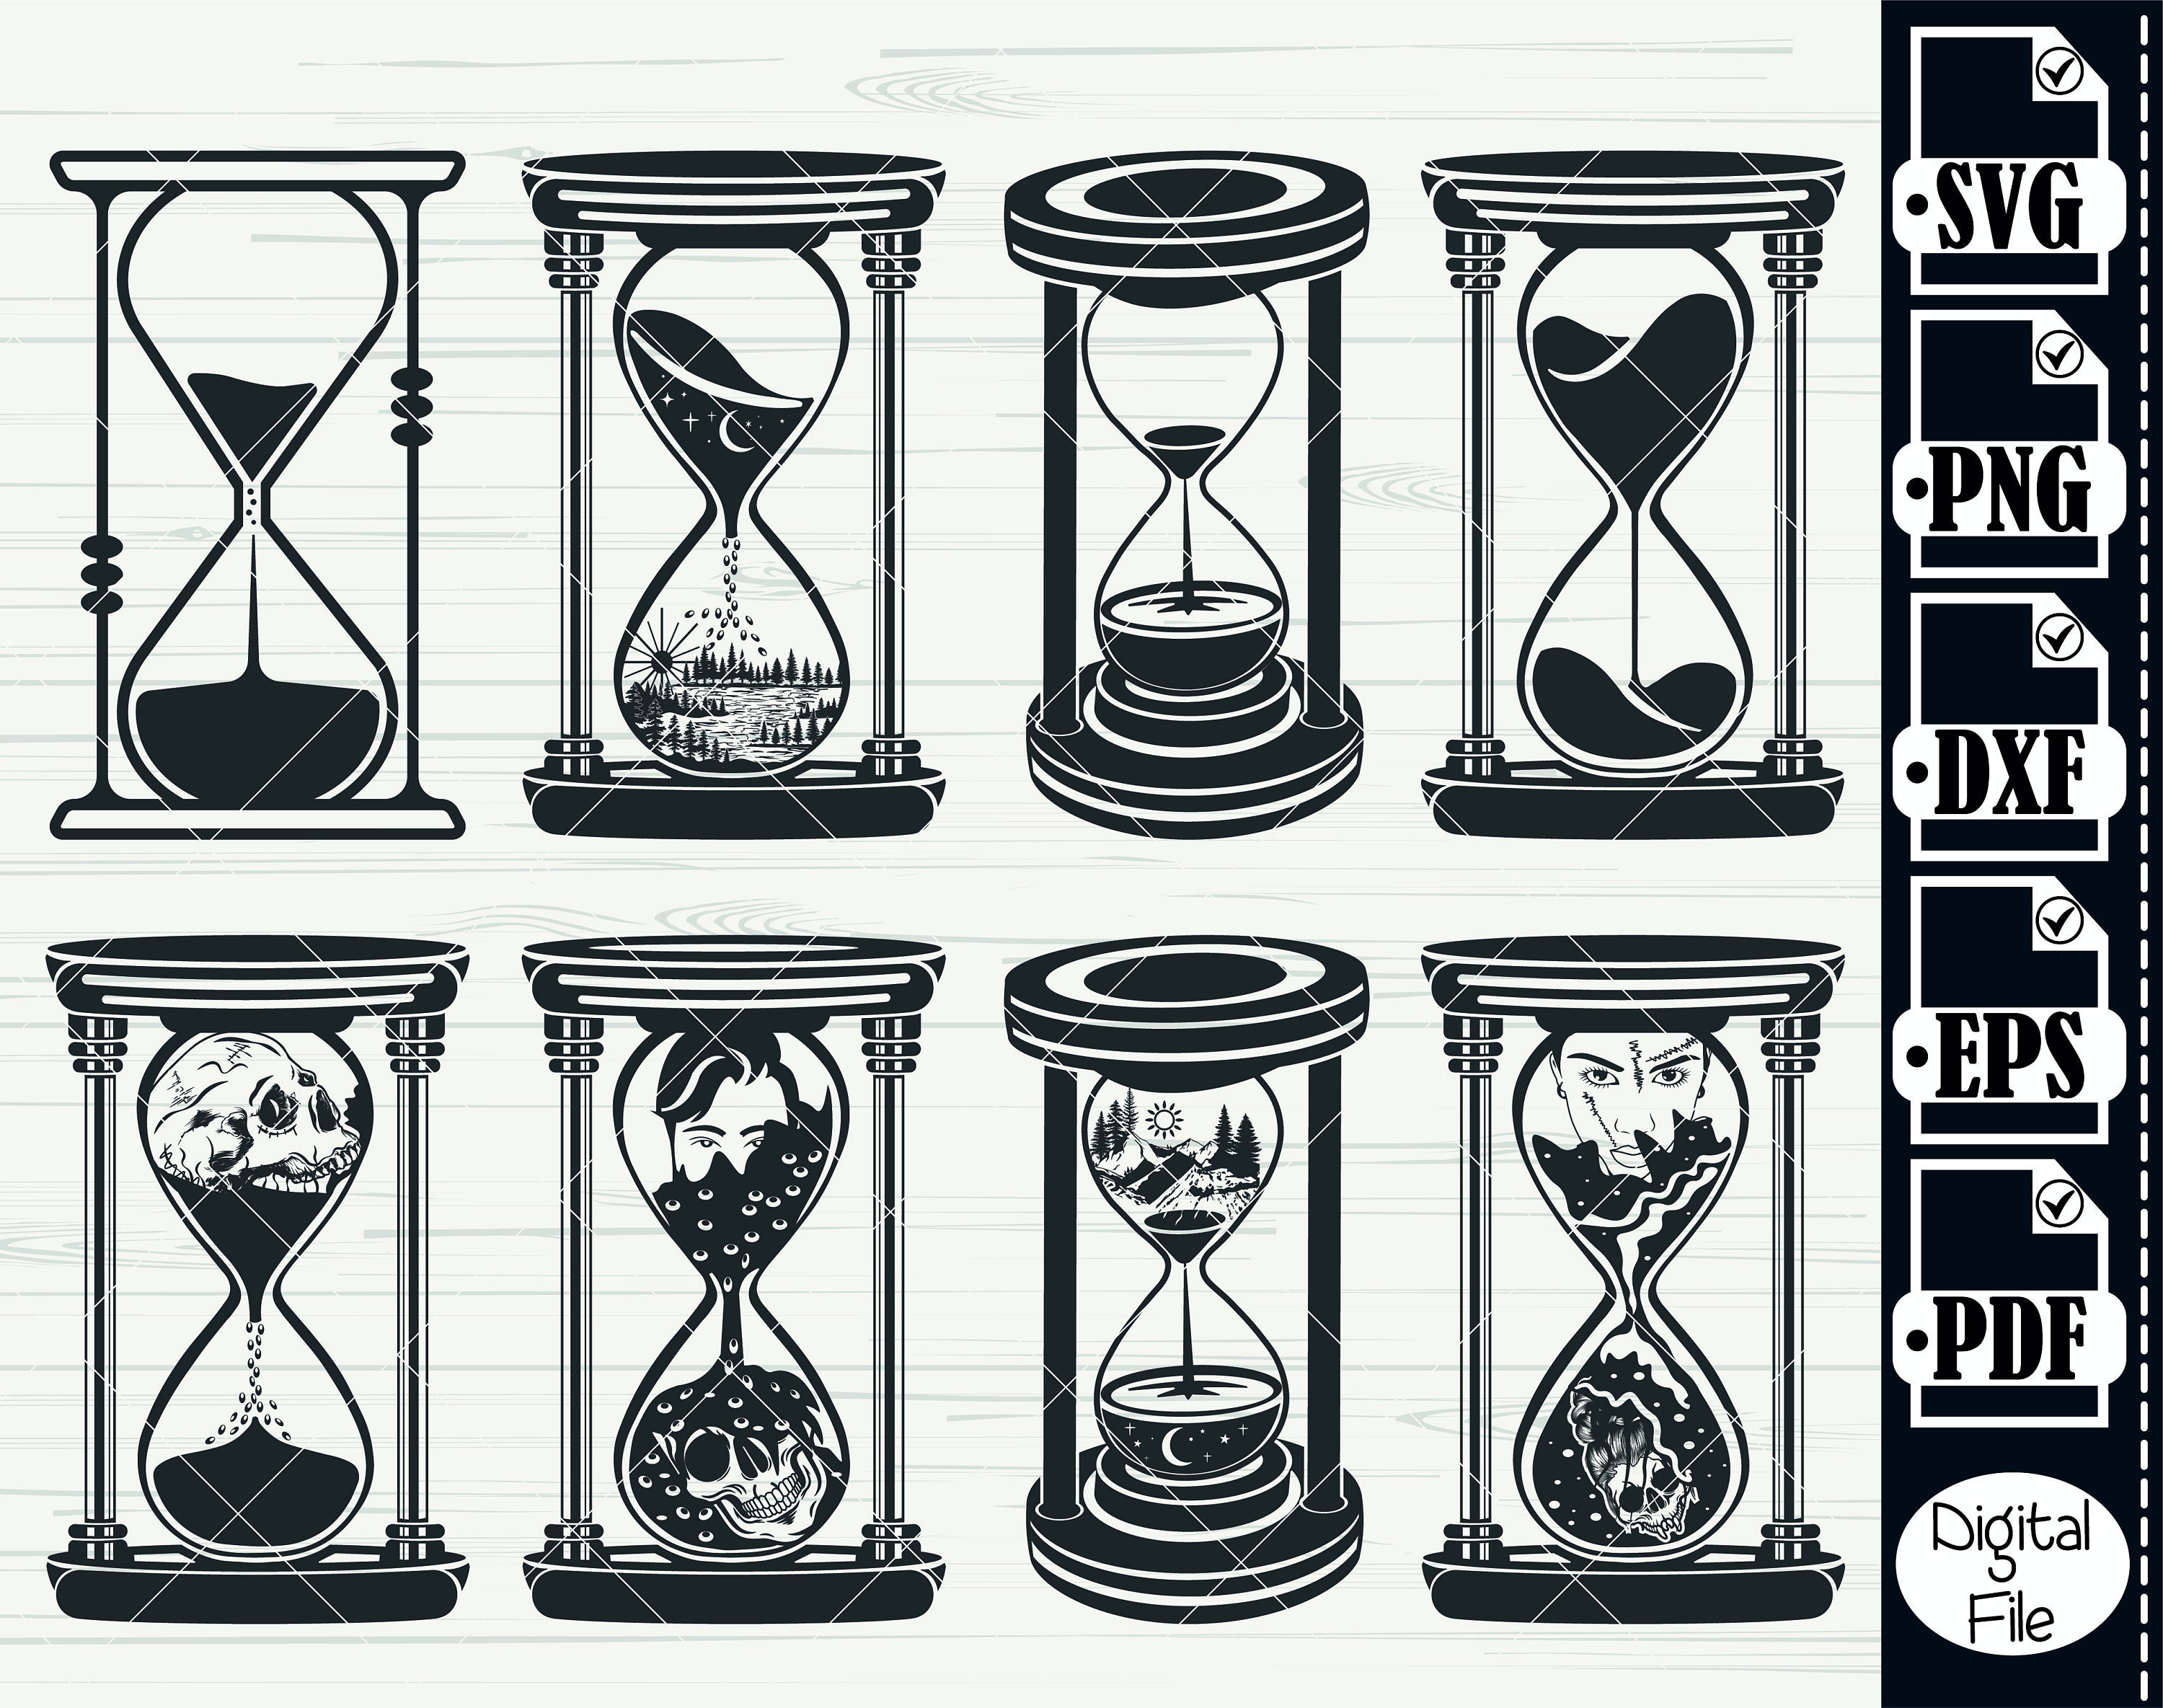 Time Is Money Hourglass Coins And Notes Stock Clipart  RoyaltyFree   FreeImages